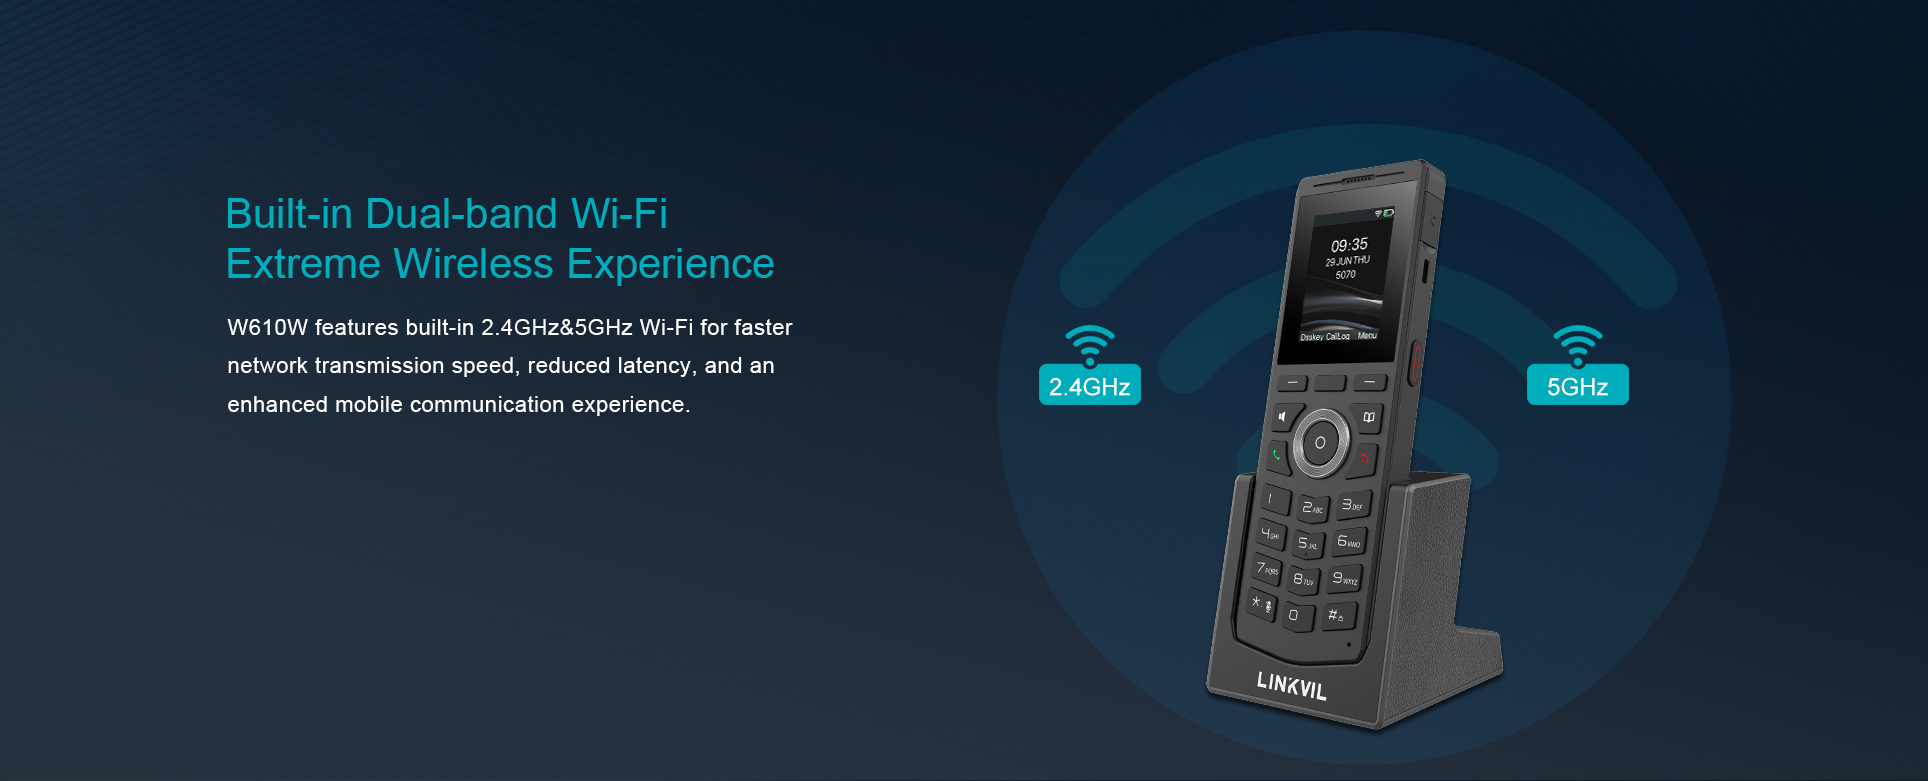 LINKVIL W610W is a portable, elegant Wi-Fi phone designed for mobile communication applications. With built-in dual-band 2.4GHz & 5GHz Wi-Fi